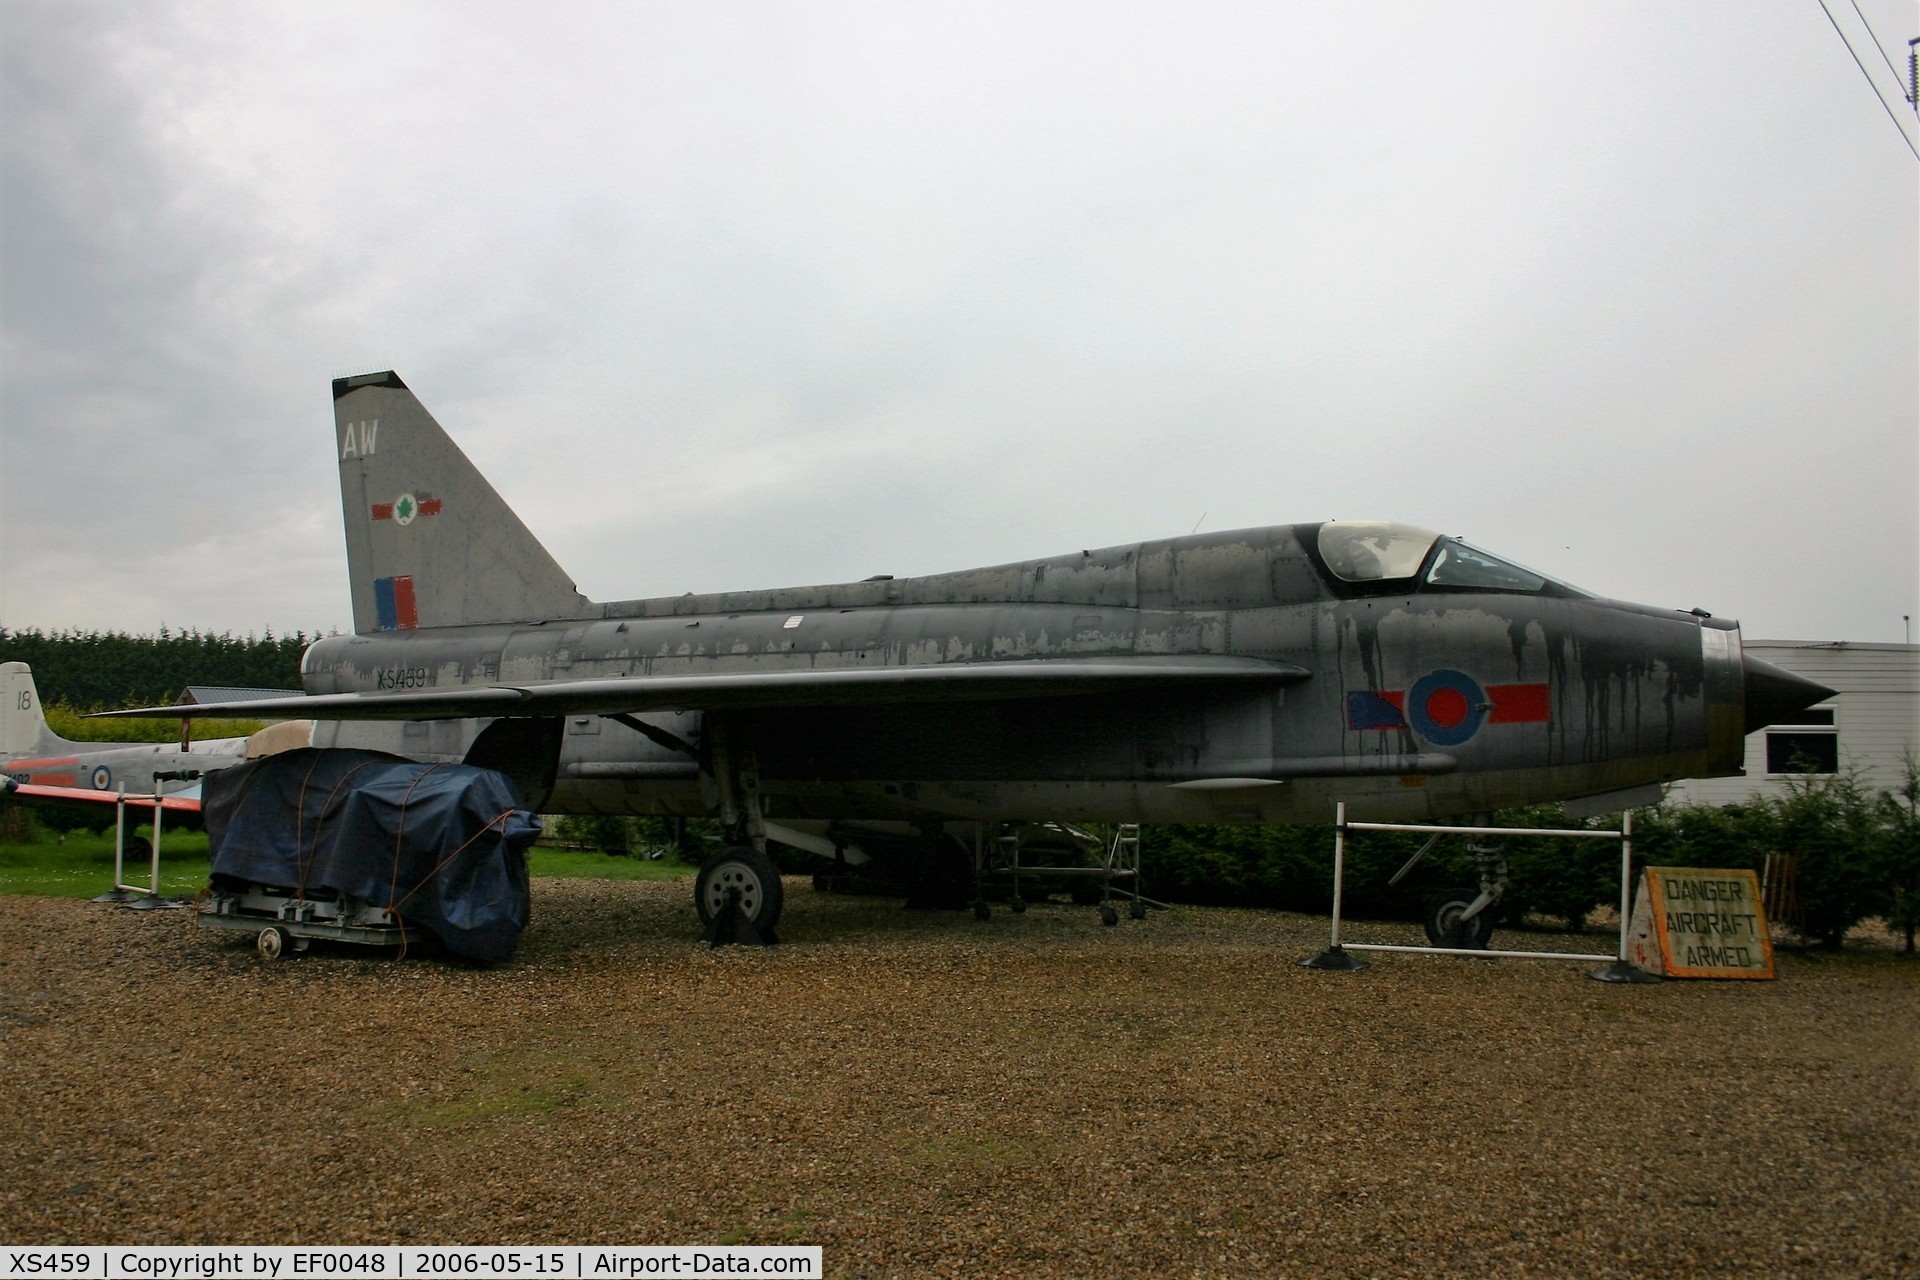 XS459, English Electric Lightning T.5 C/N 95019, since been repainted